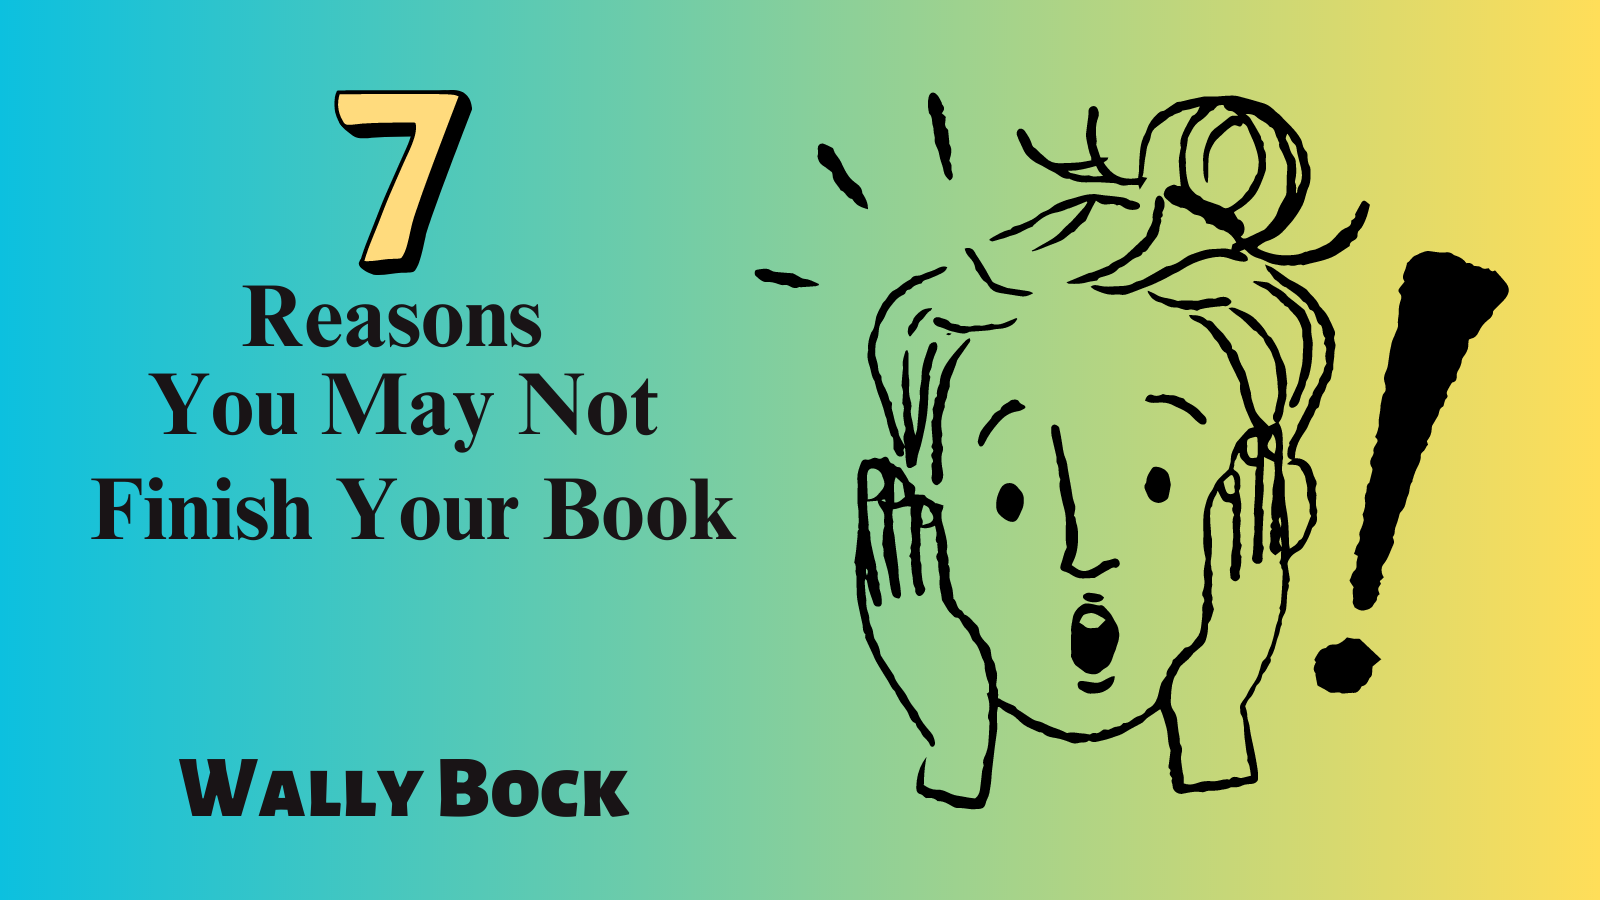 7 reasons you may not finish your book